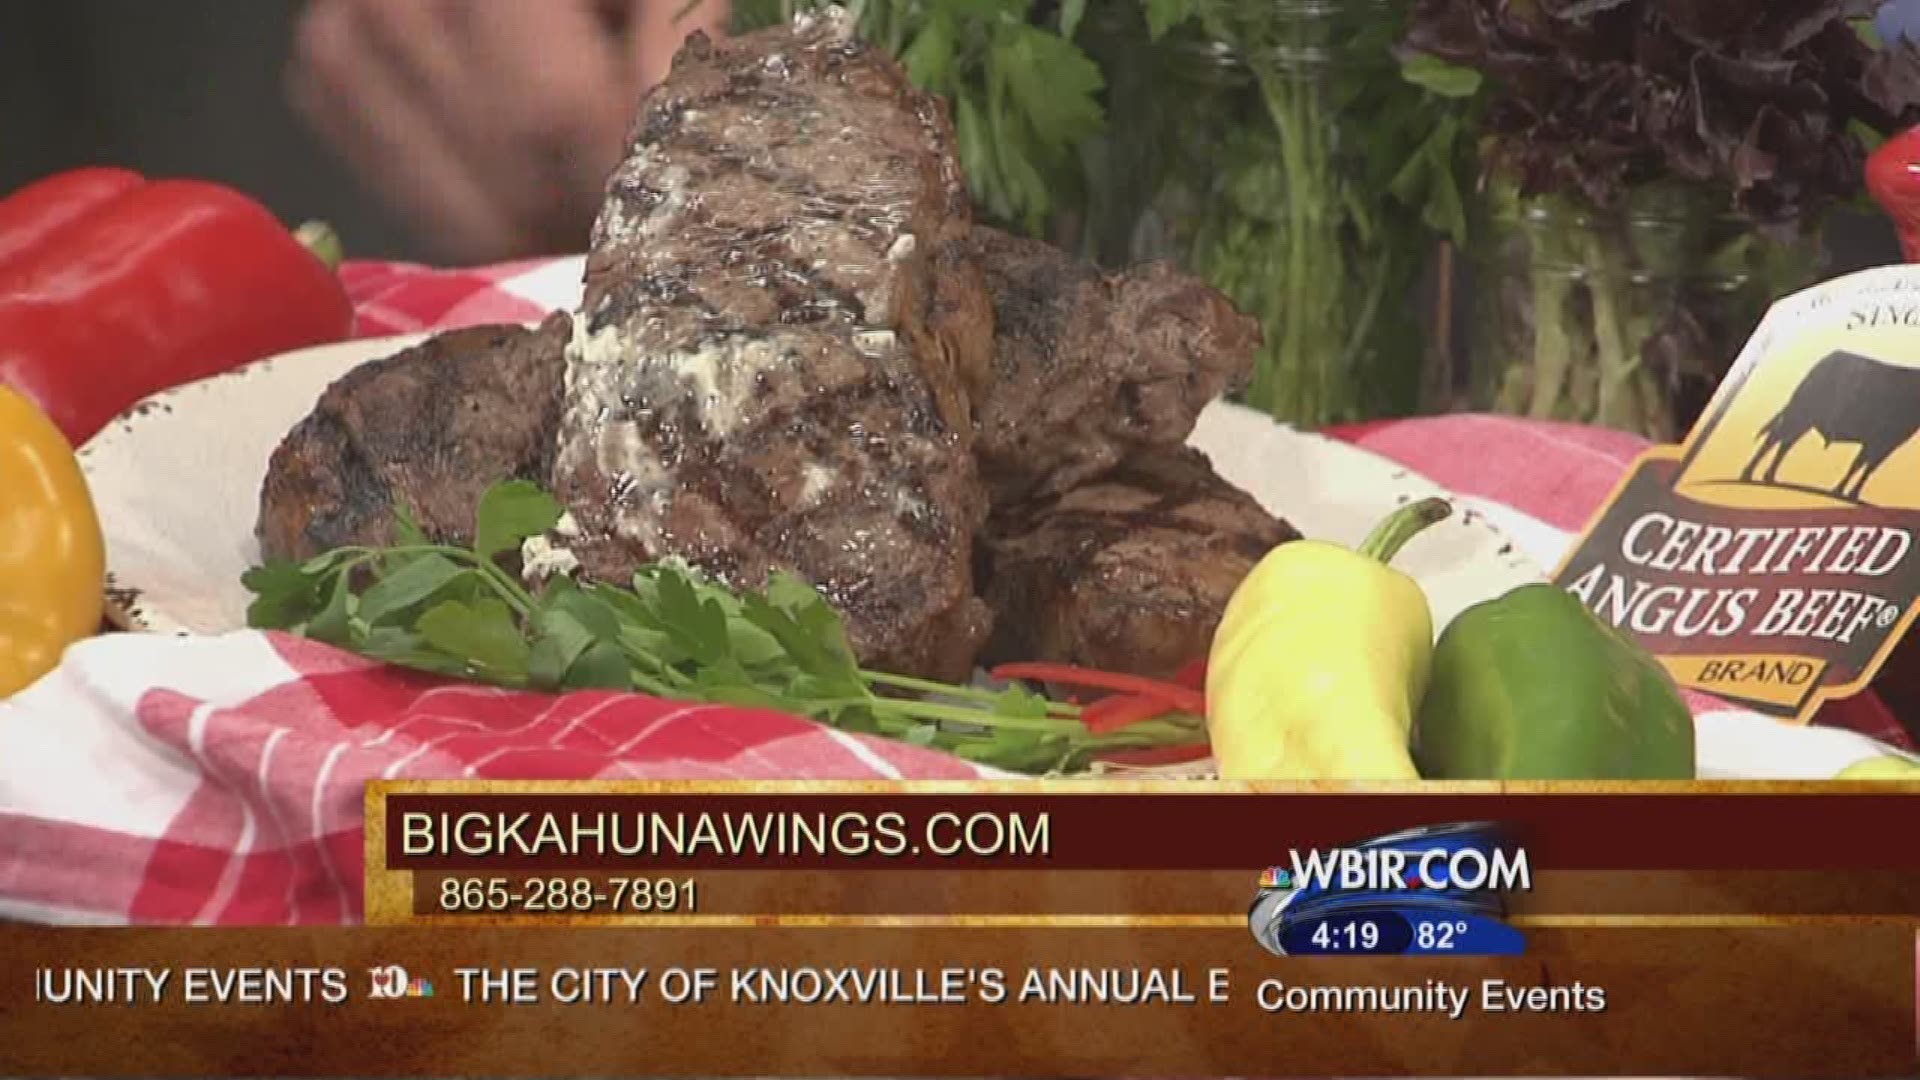 Live at Five at 4June 9, 2016The Big Kahuna Wing Festival is June 11, 2016 at World's Fair Park from noon until 8pm. For more information visit bkwfestival.com/information/